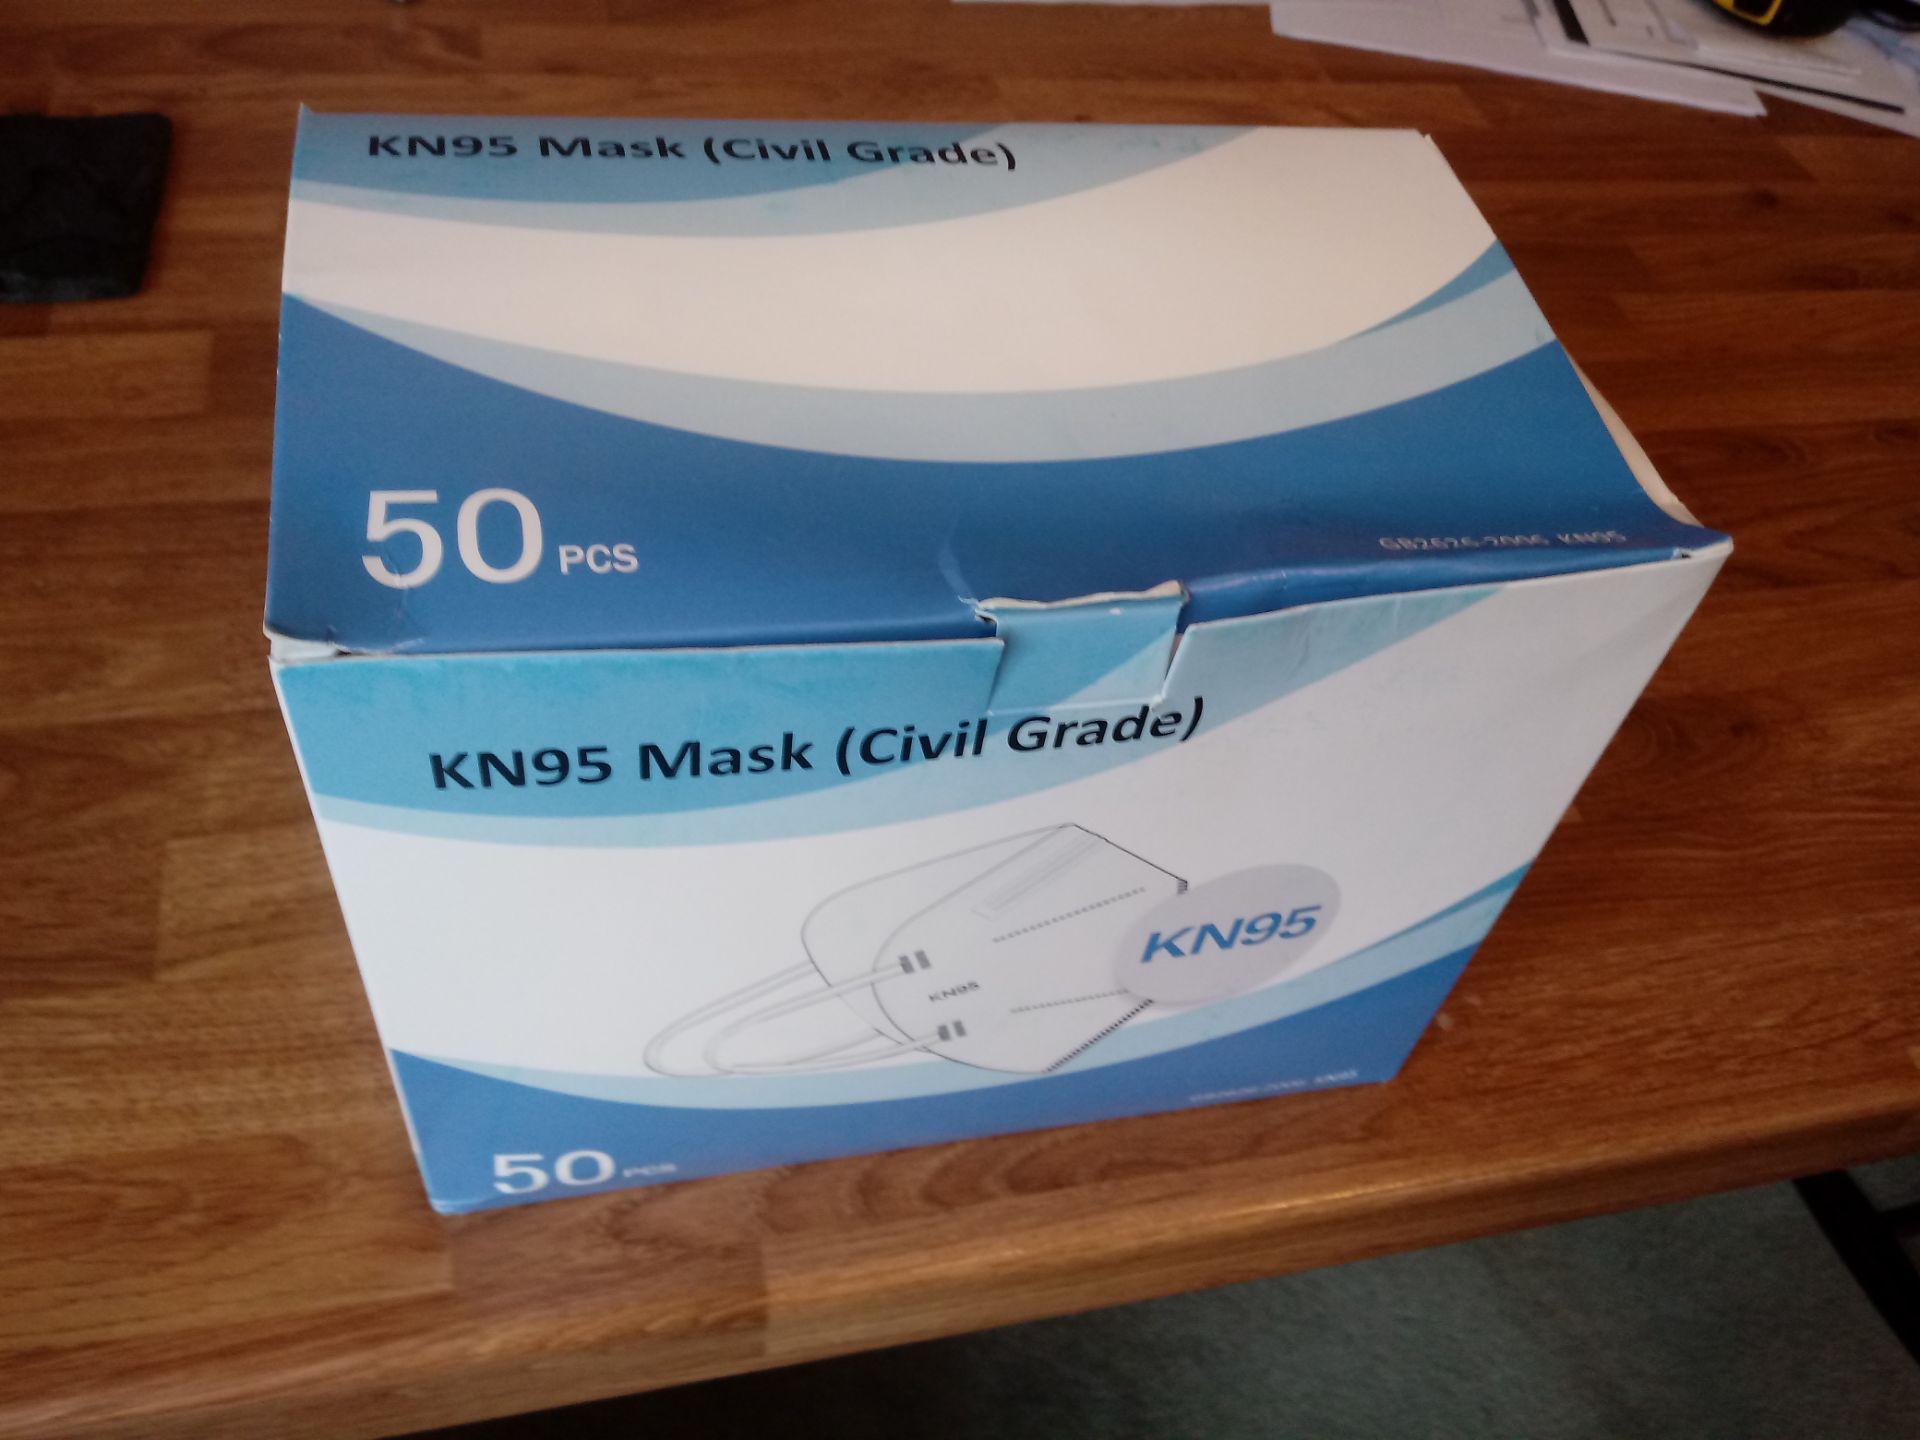 500 KN95 Masks with certificates